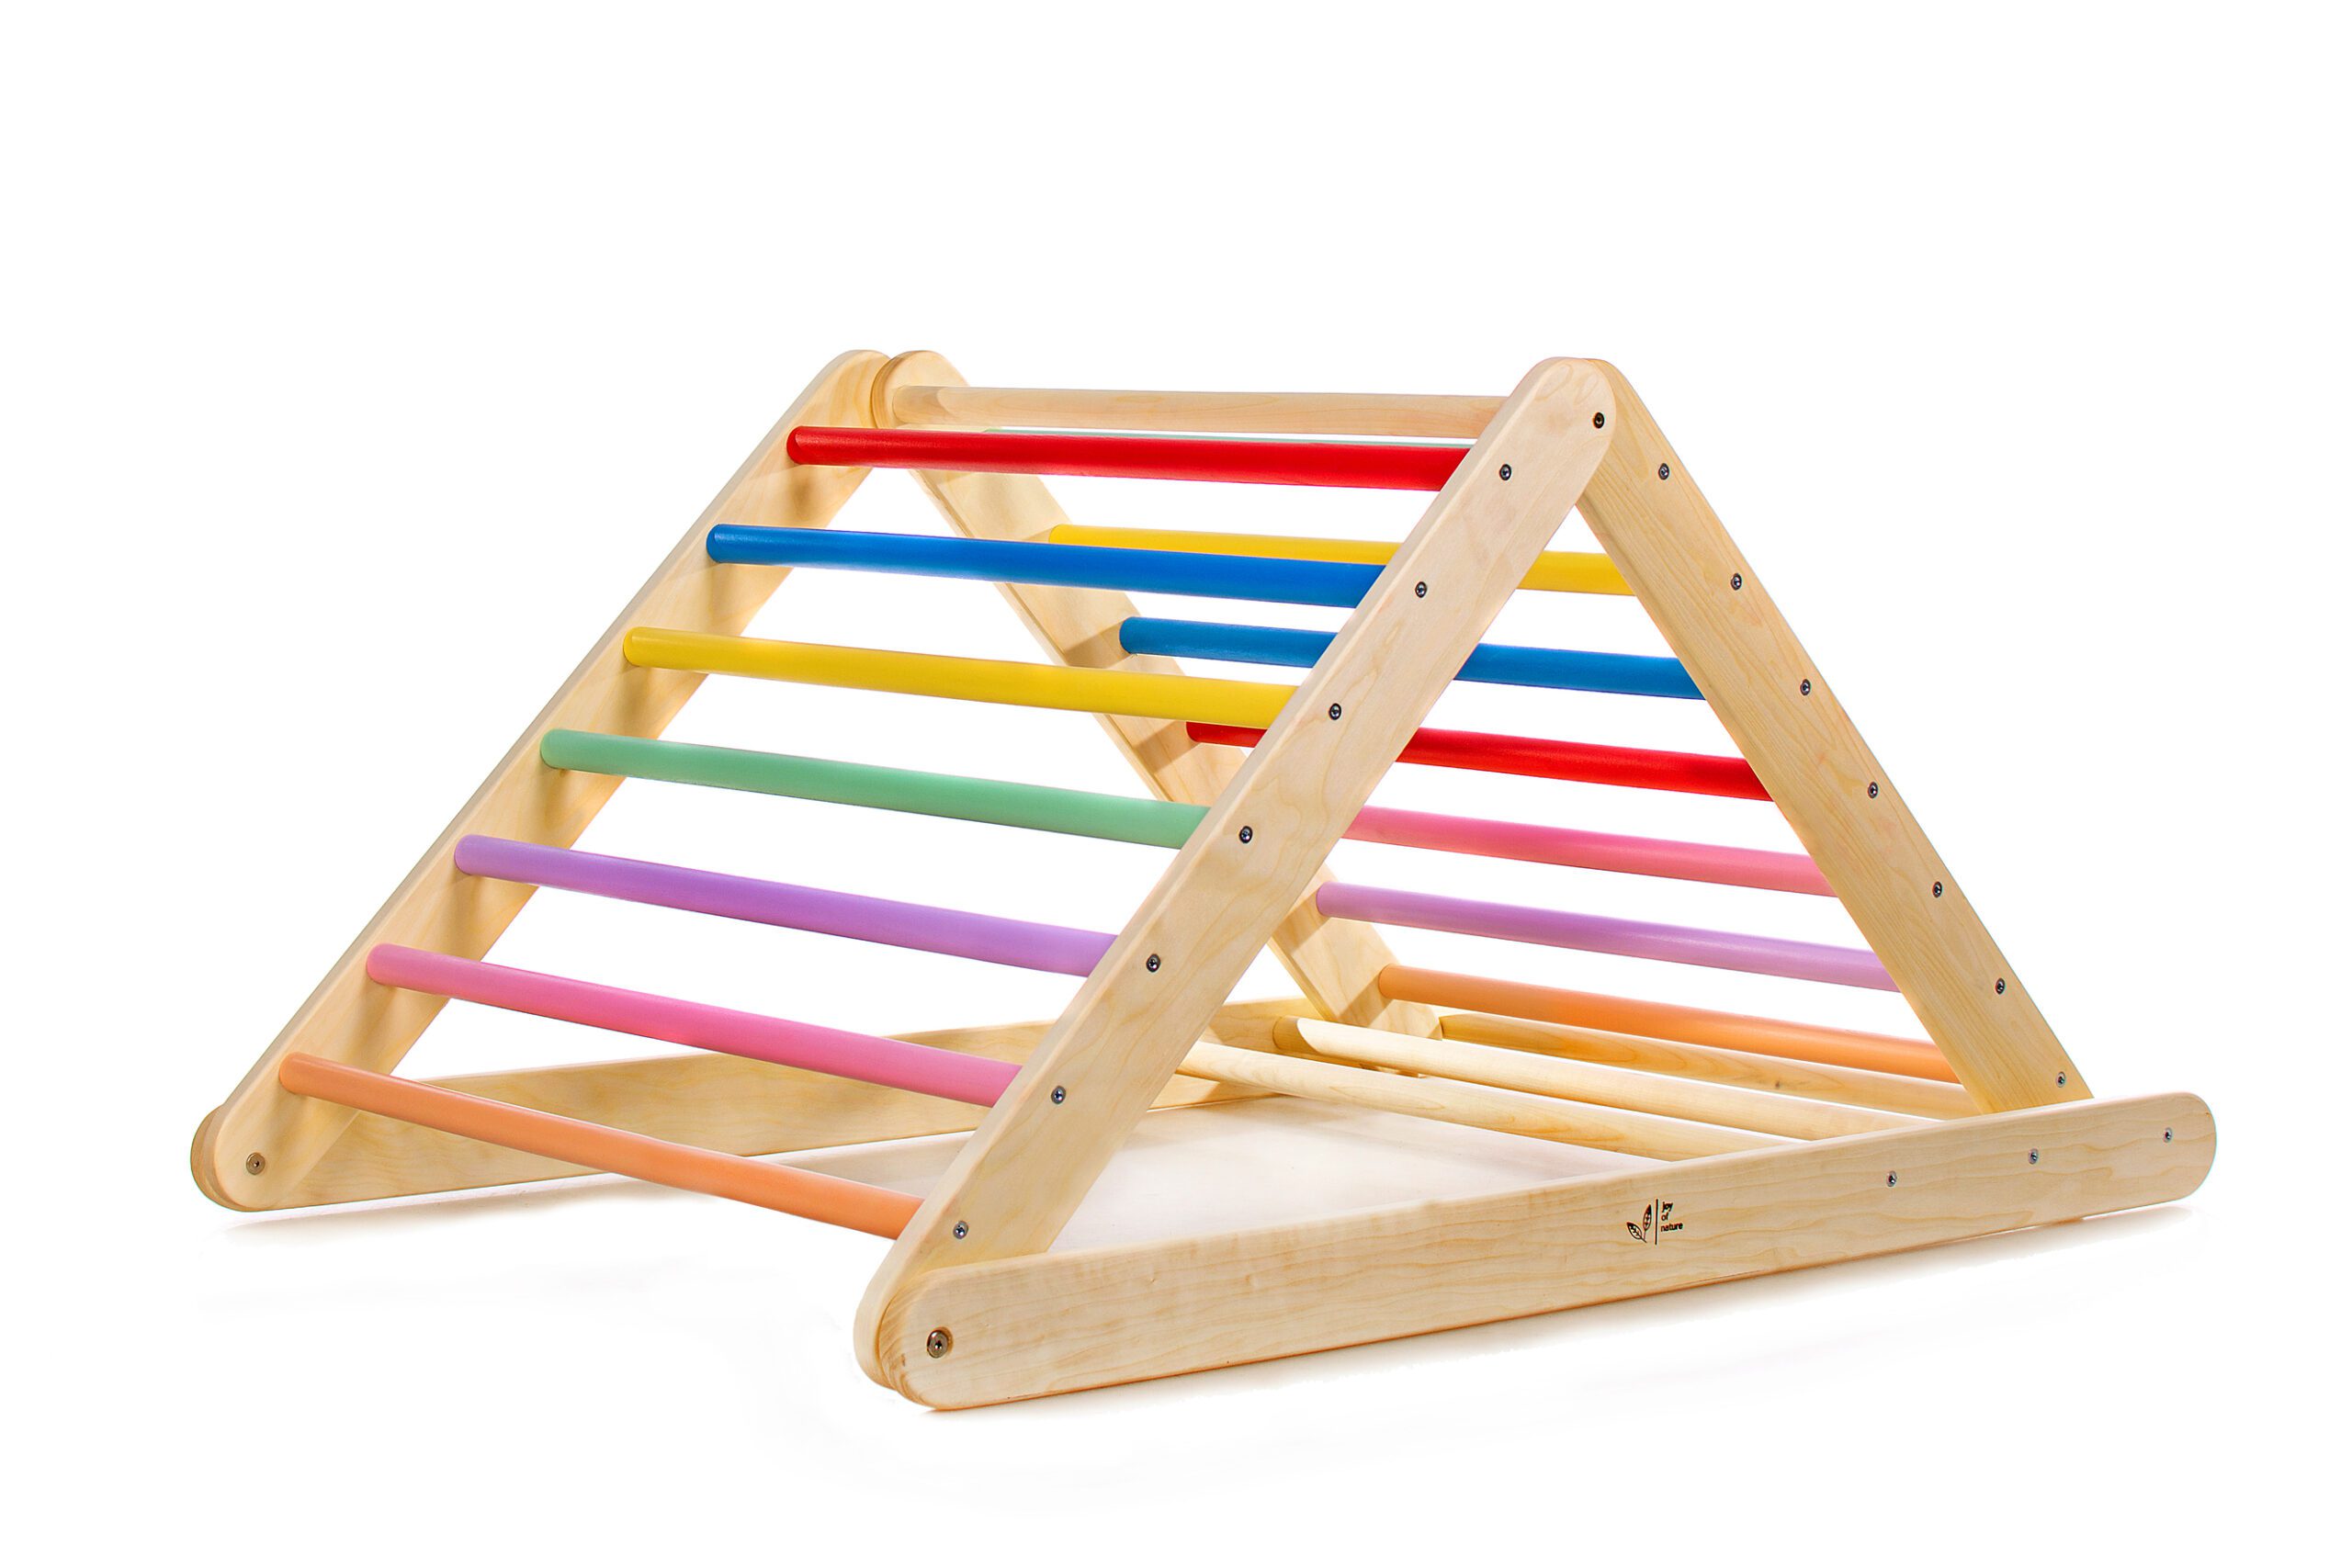 Natural Gym & Daycare Kids Wooden Climbing Triangle Ladder Indoor Climbing Toys for Playground 3 Different Climbing Ladders HONEY JOY Triangle Climber for Toddler Gift for Boys Girls 3+ 